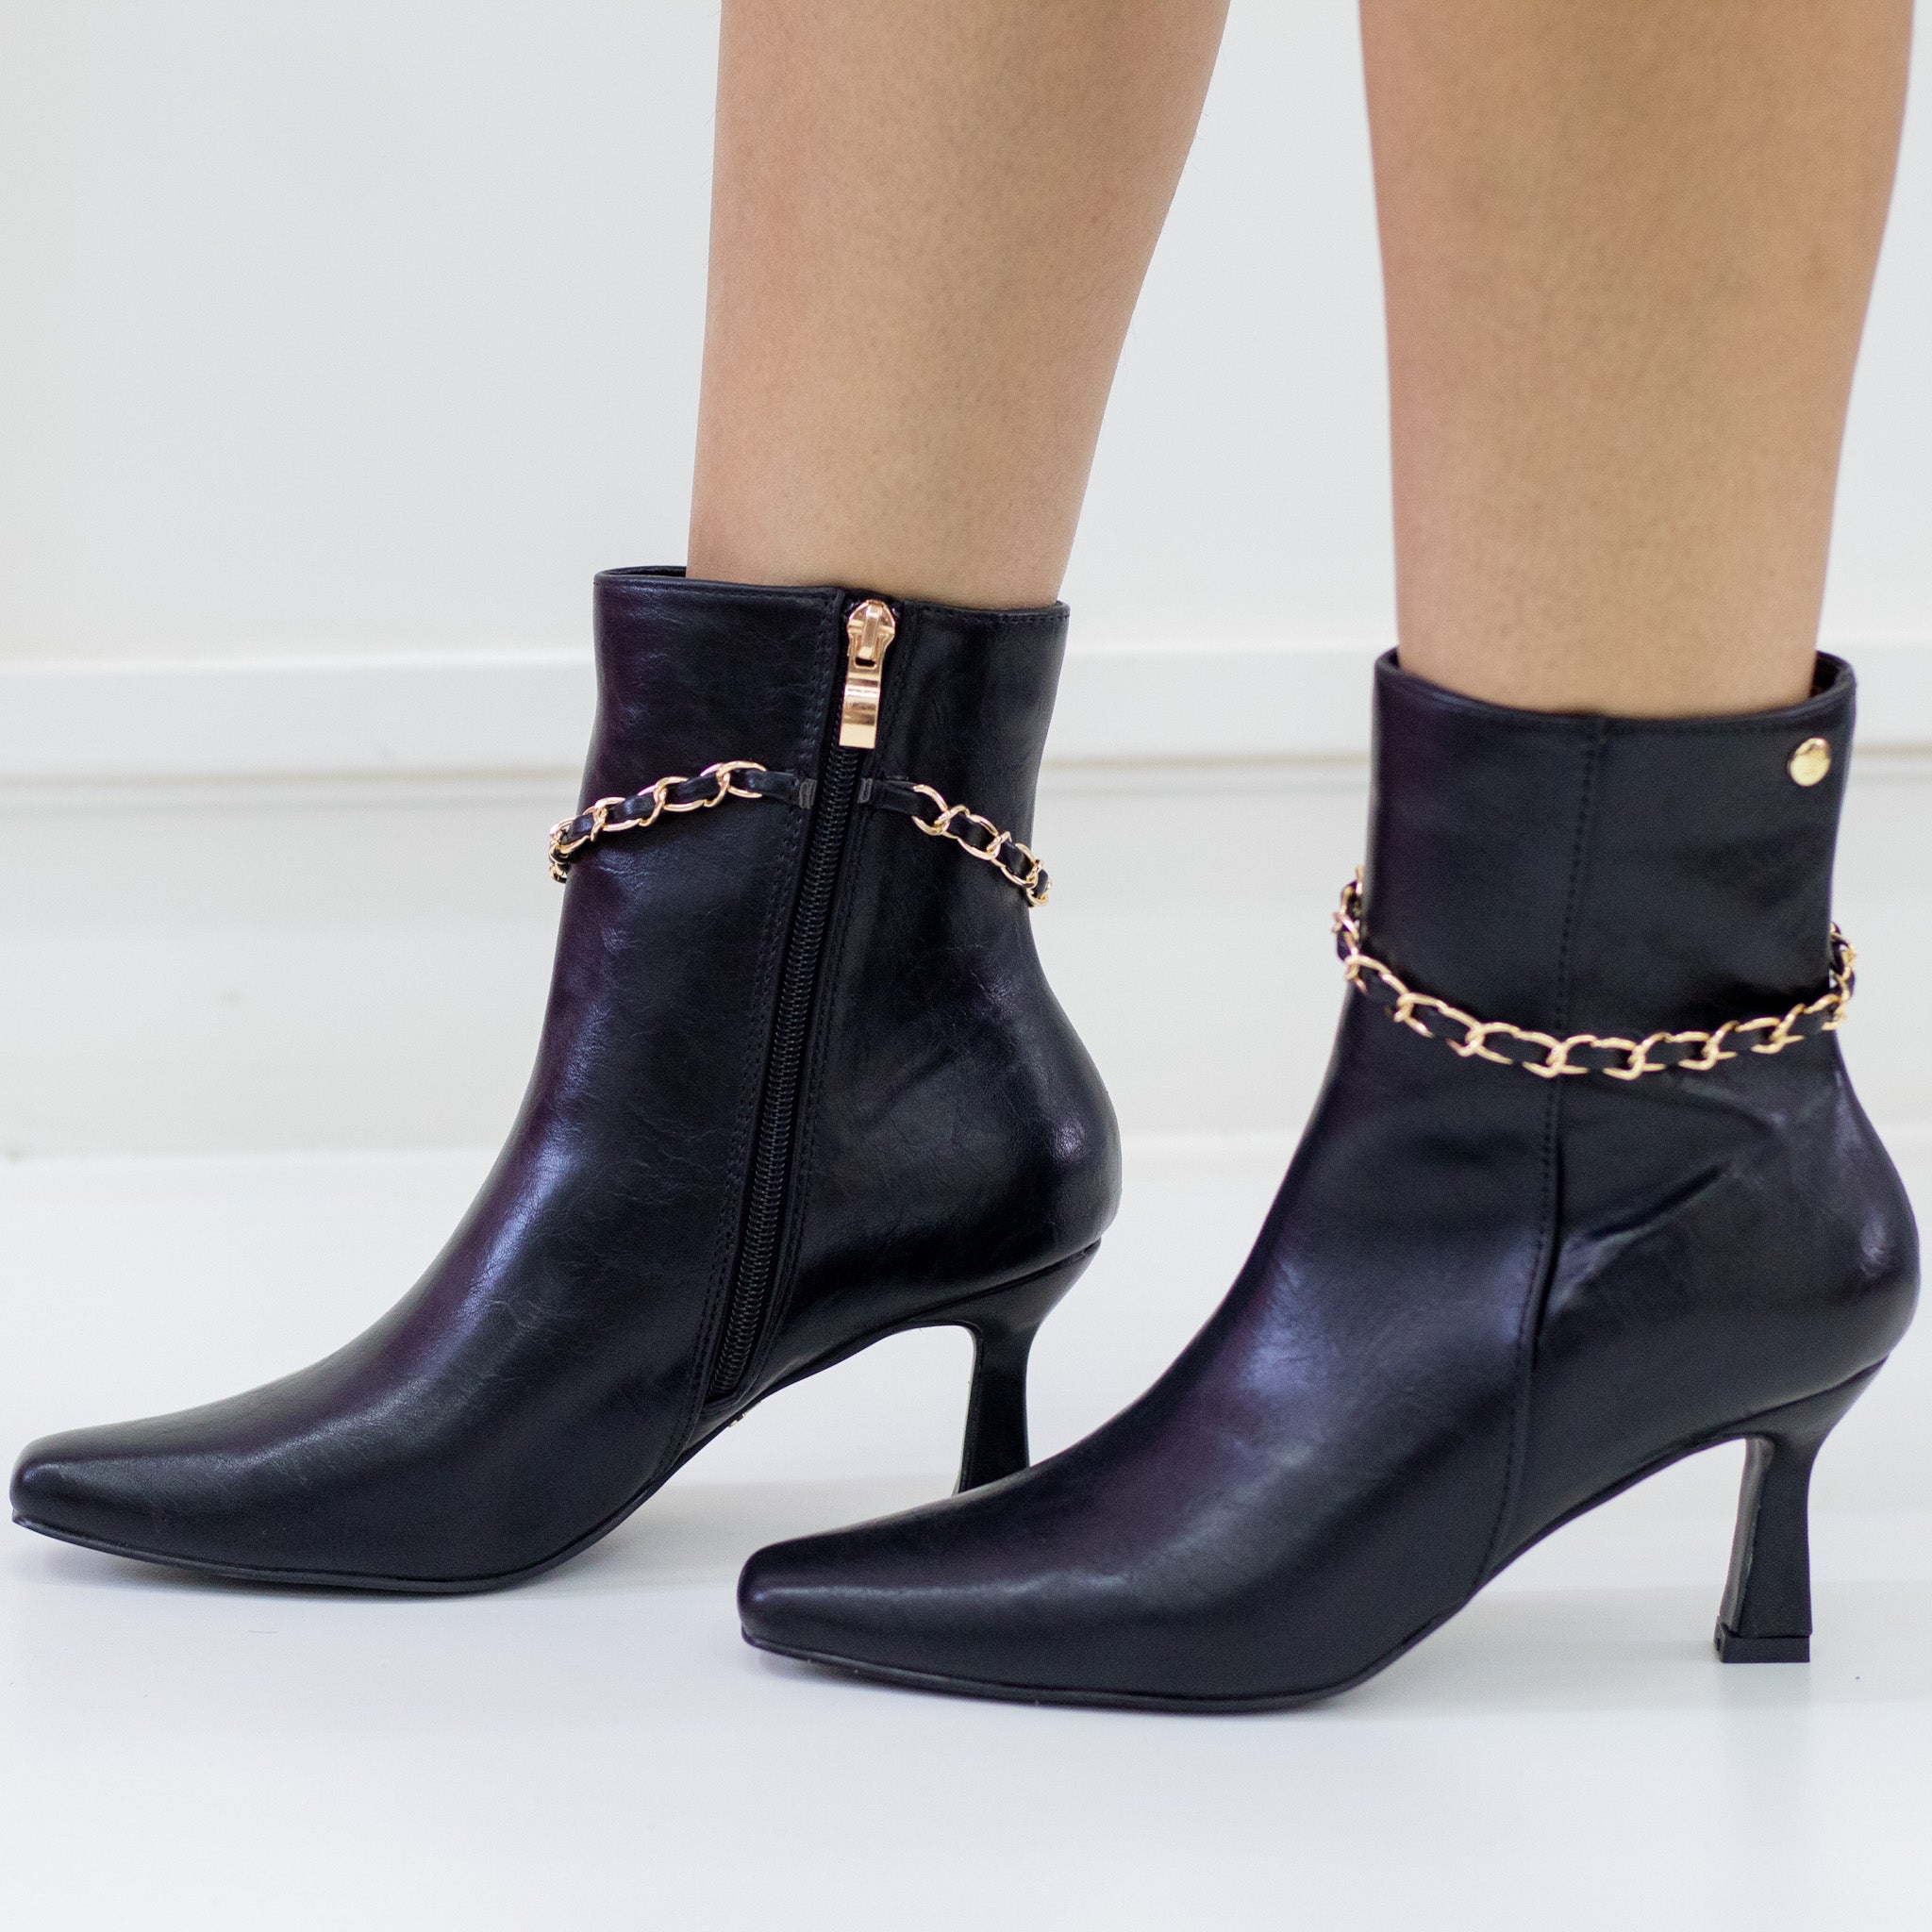 Preview 7cm heel faux leather pu ankle boot black